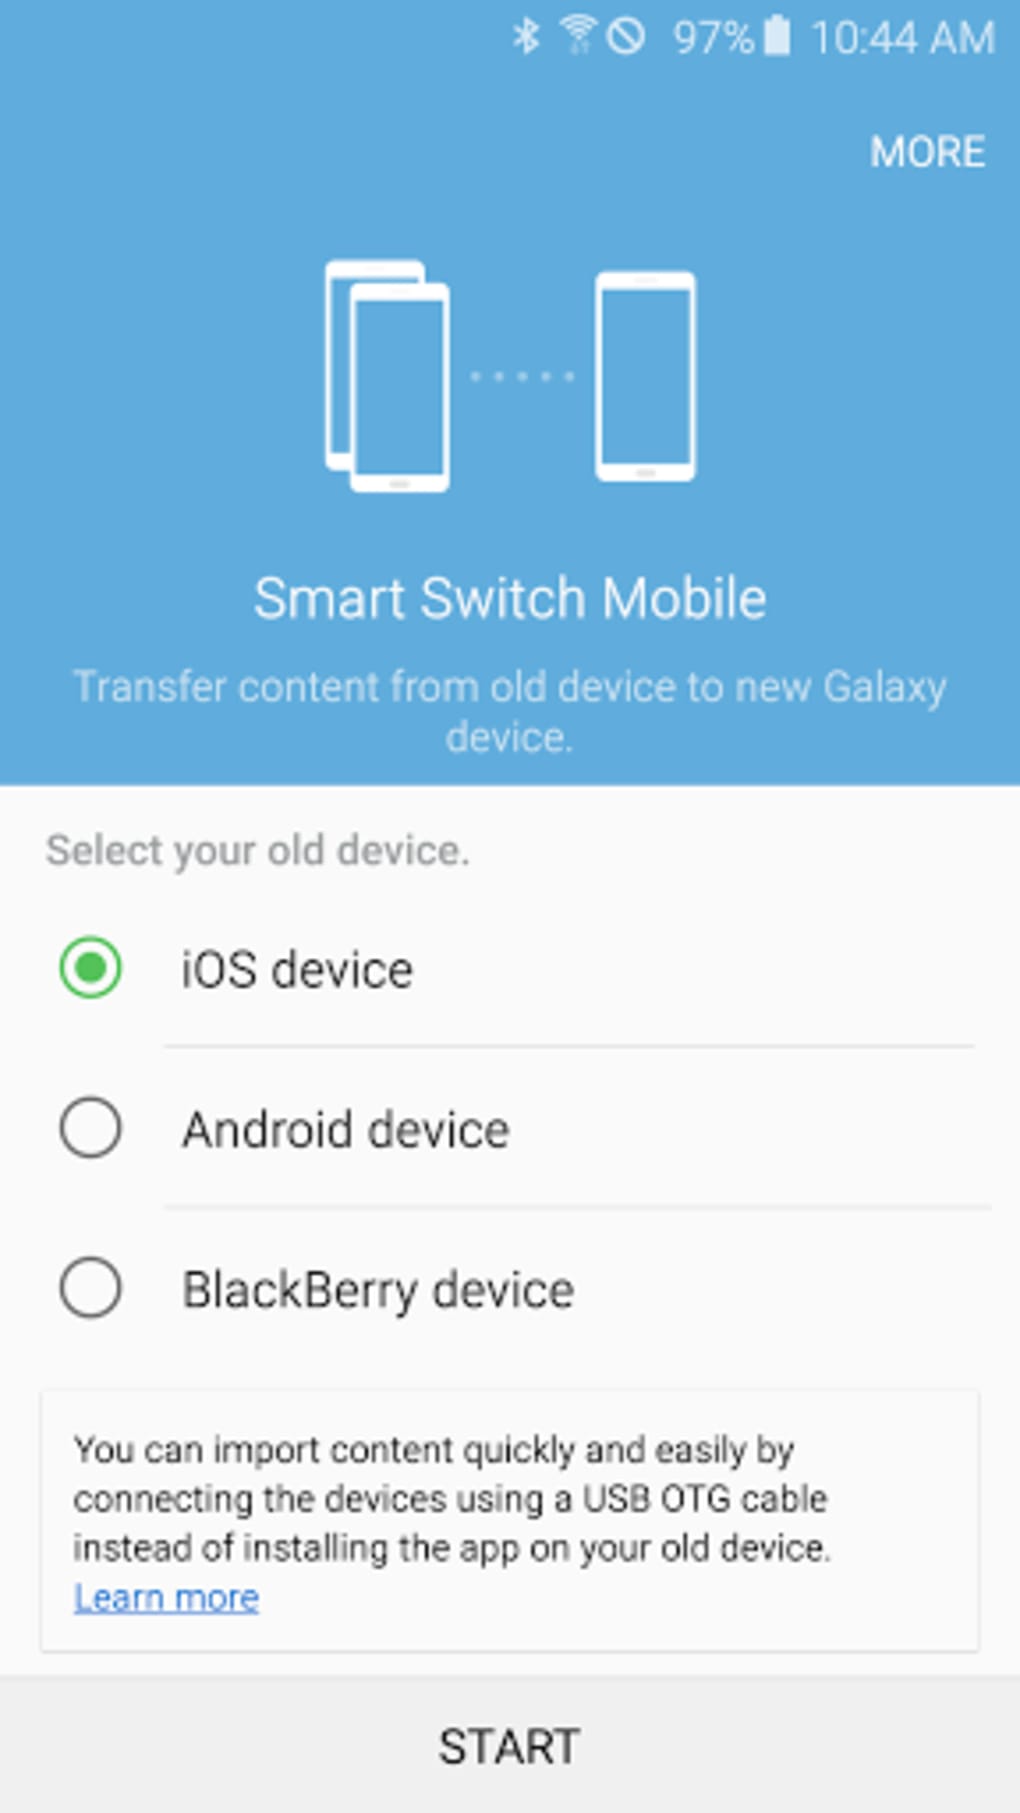 download the last version for iphoneSamsung Smart Switch 4.3.23052.1